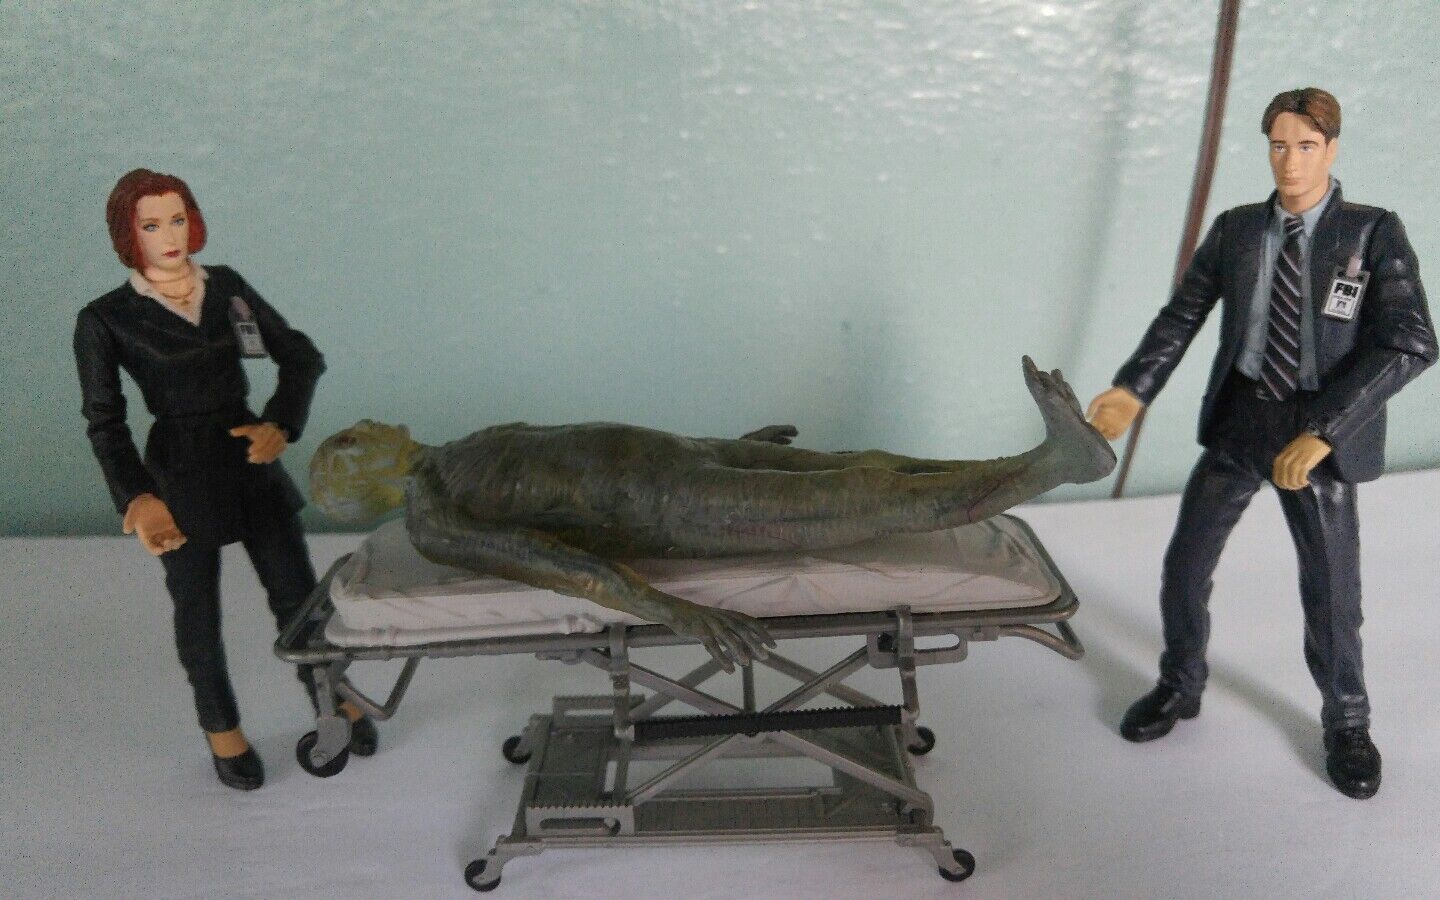 Loose 1998 McFarlane Toys The X-Files Series 1 Three Ultra Action Figures Без бренда